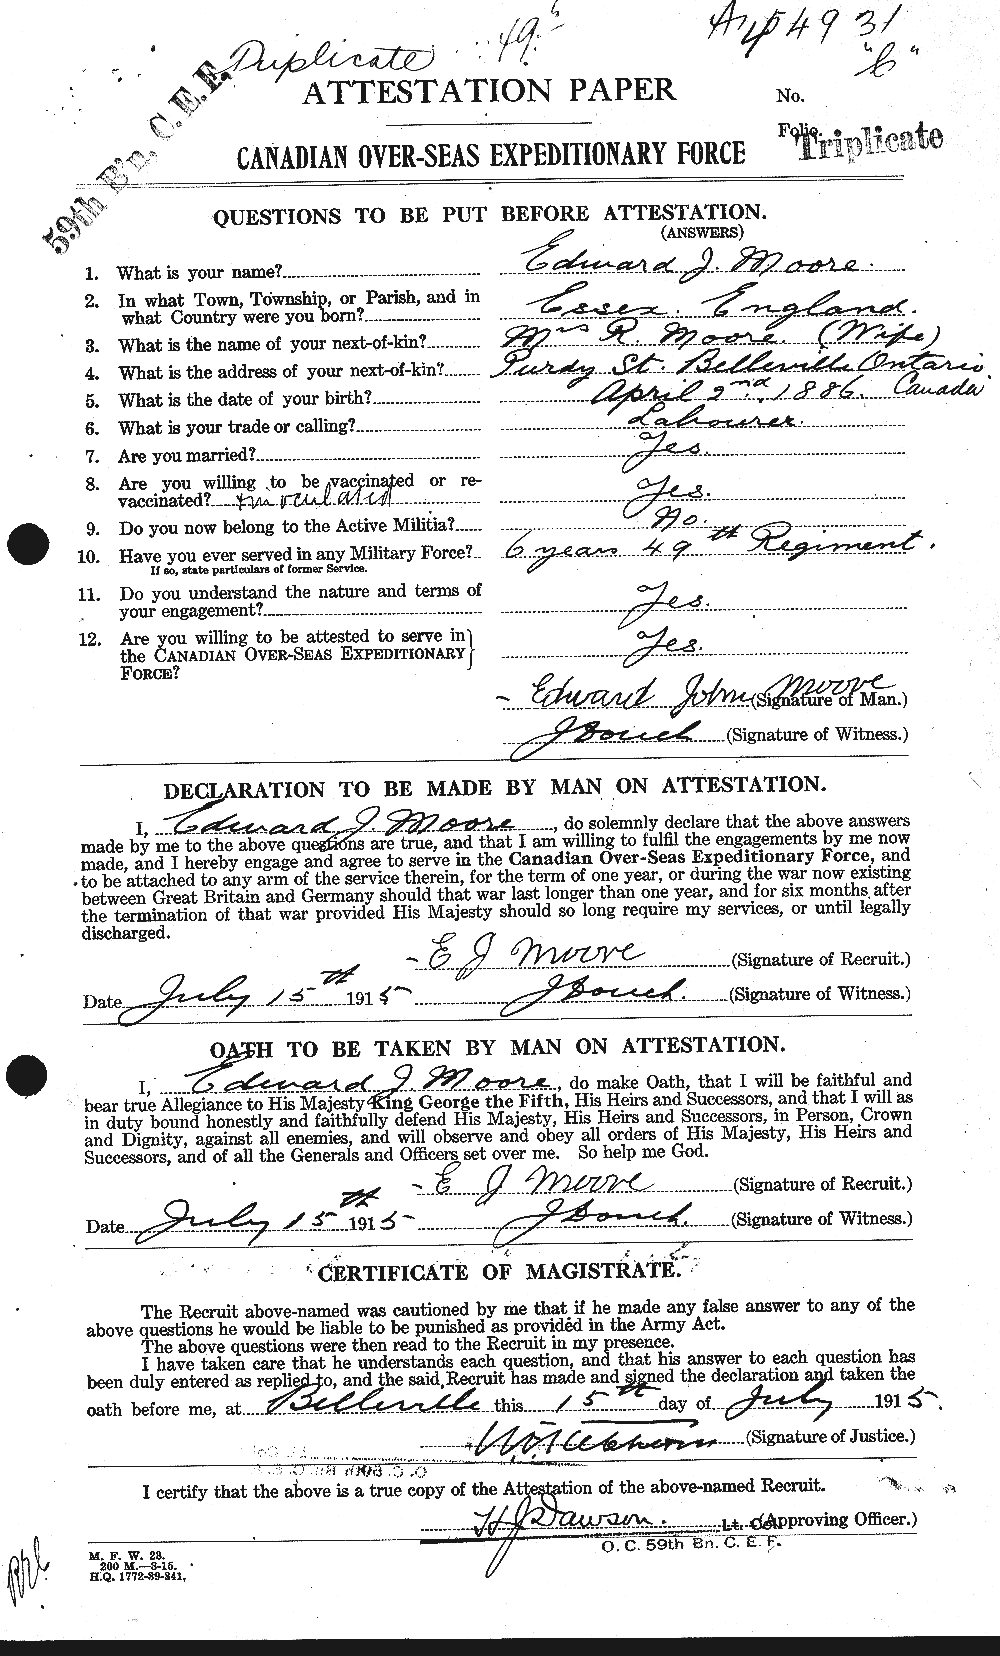 Personnel Records of the First World War - CEF 506631a